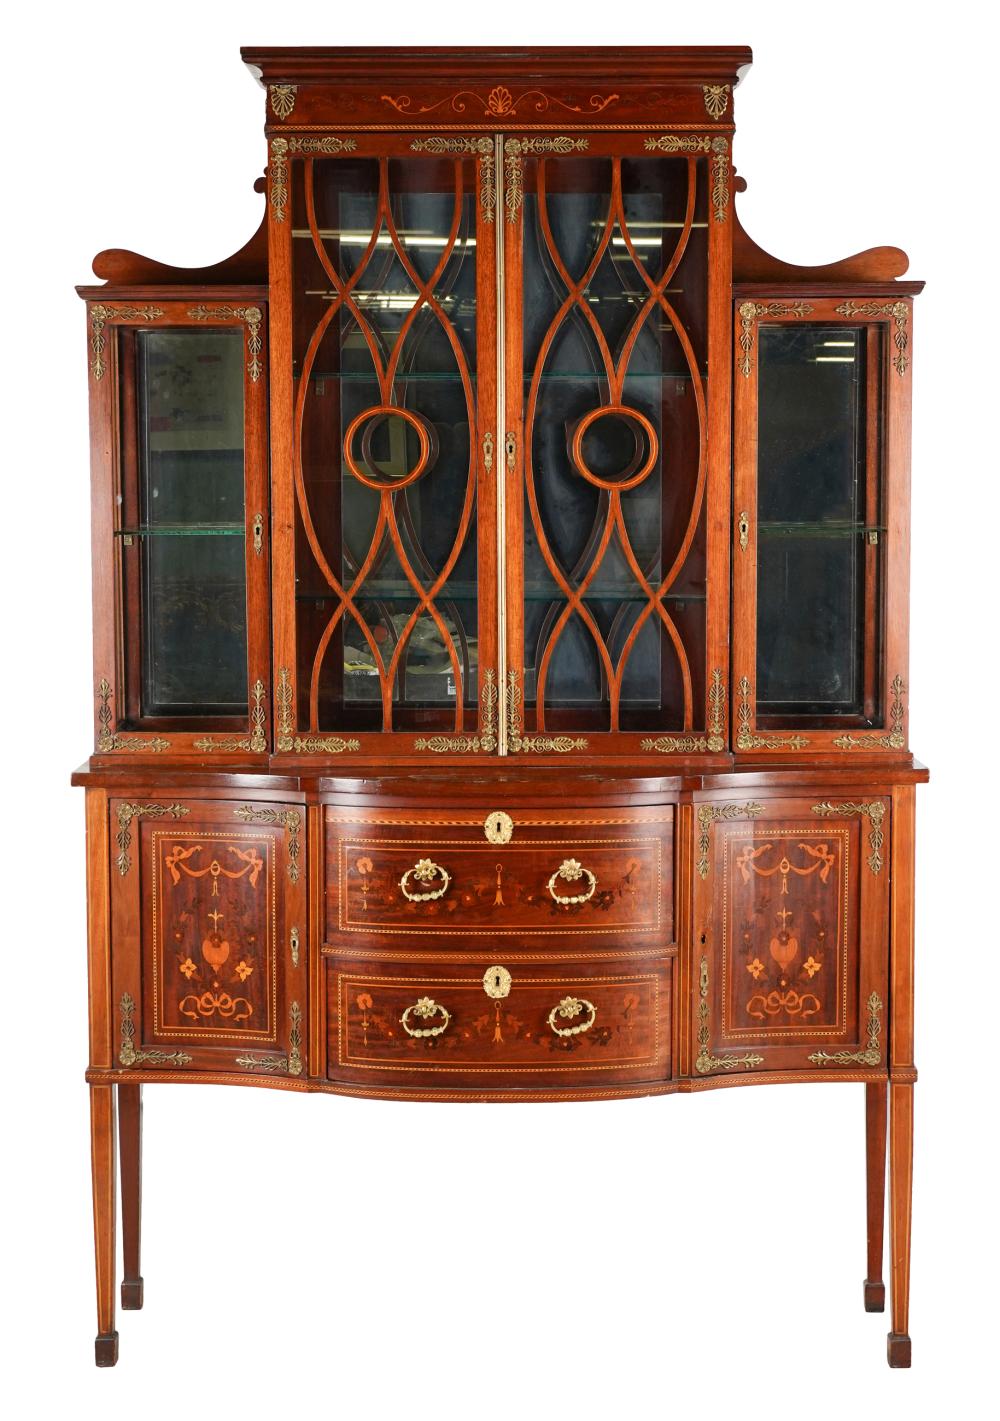 EDWARDIAN MARQUETRY INLAID BOOKCASE 32d66e